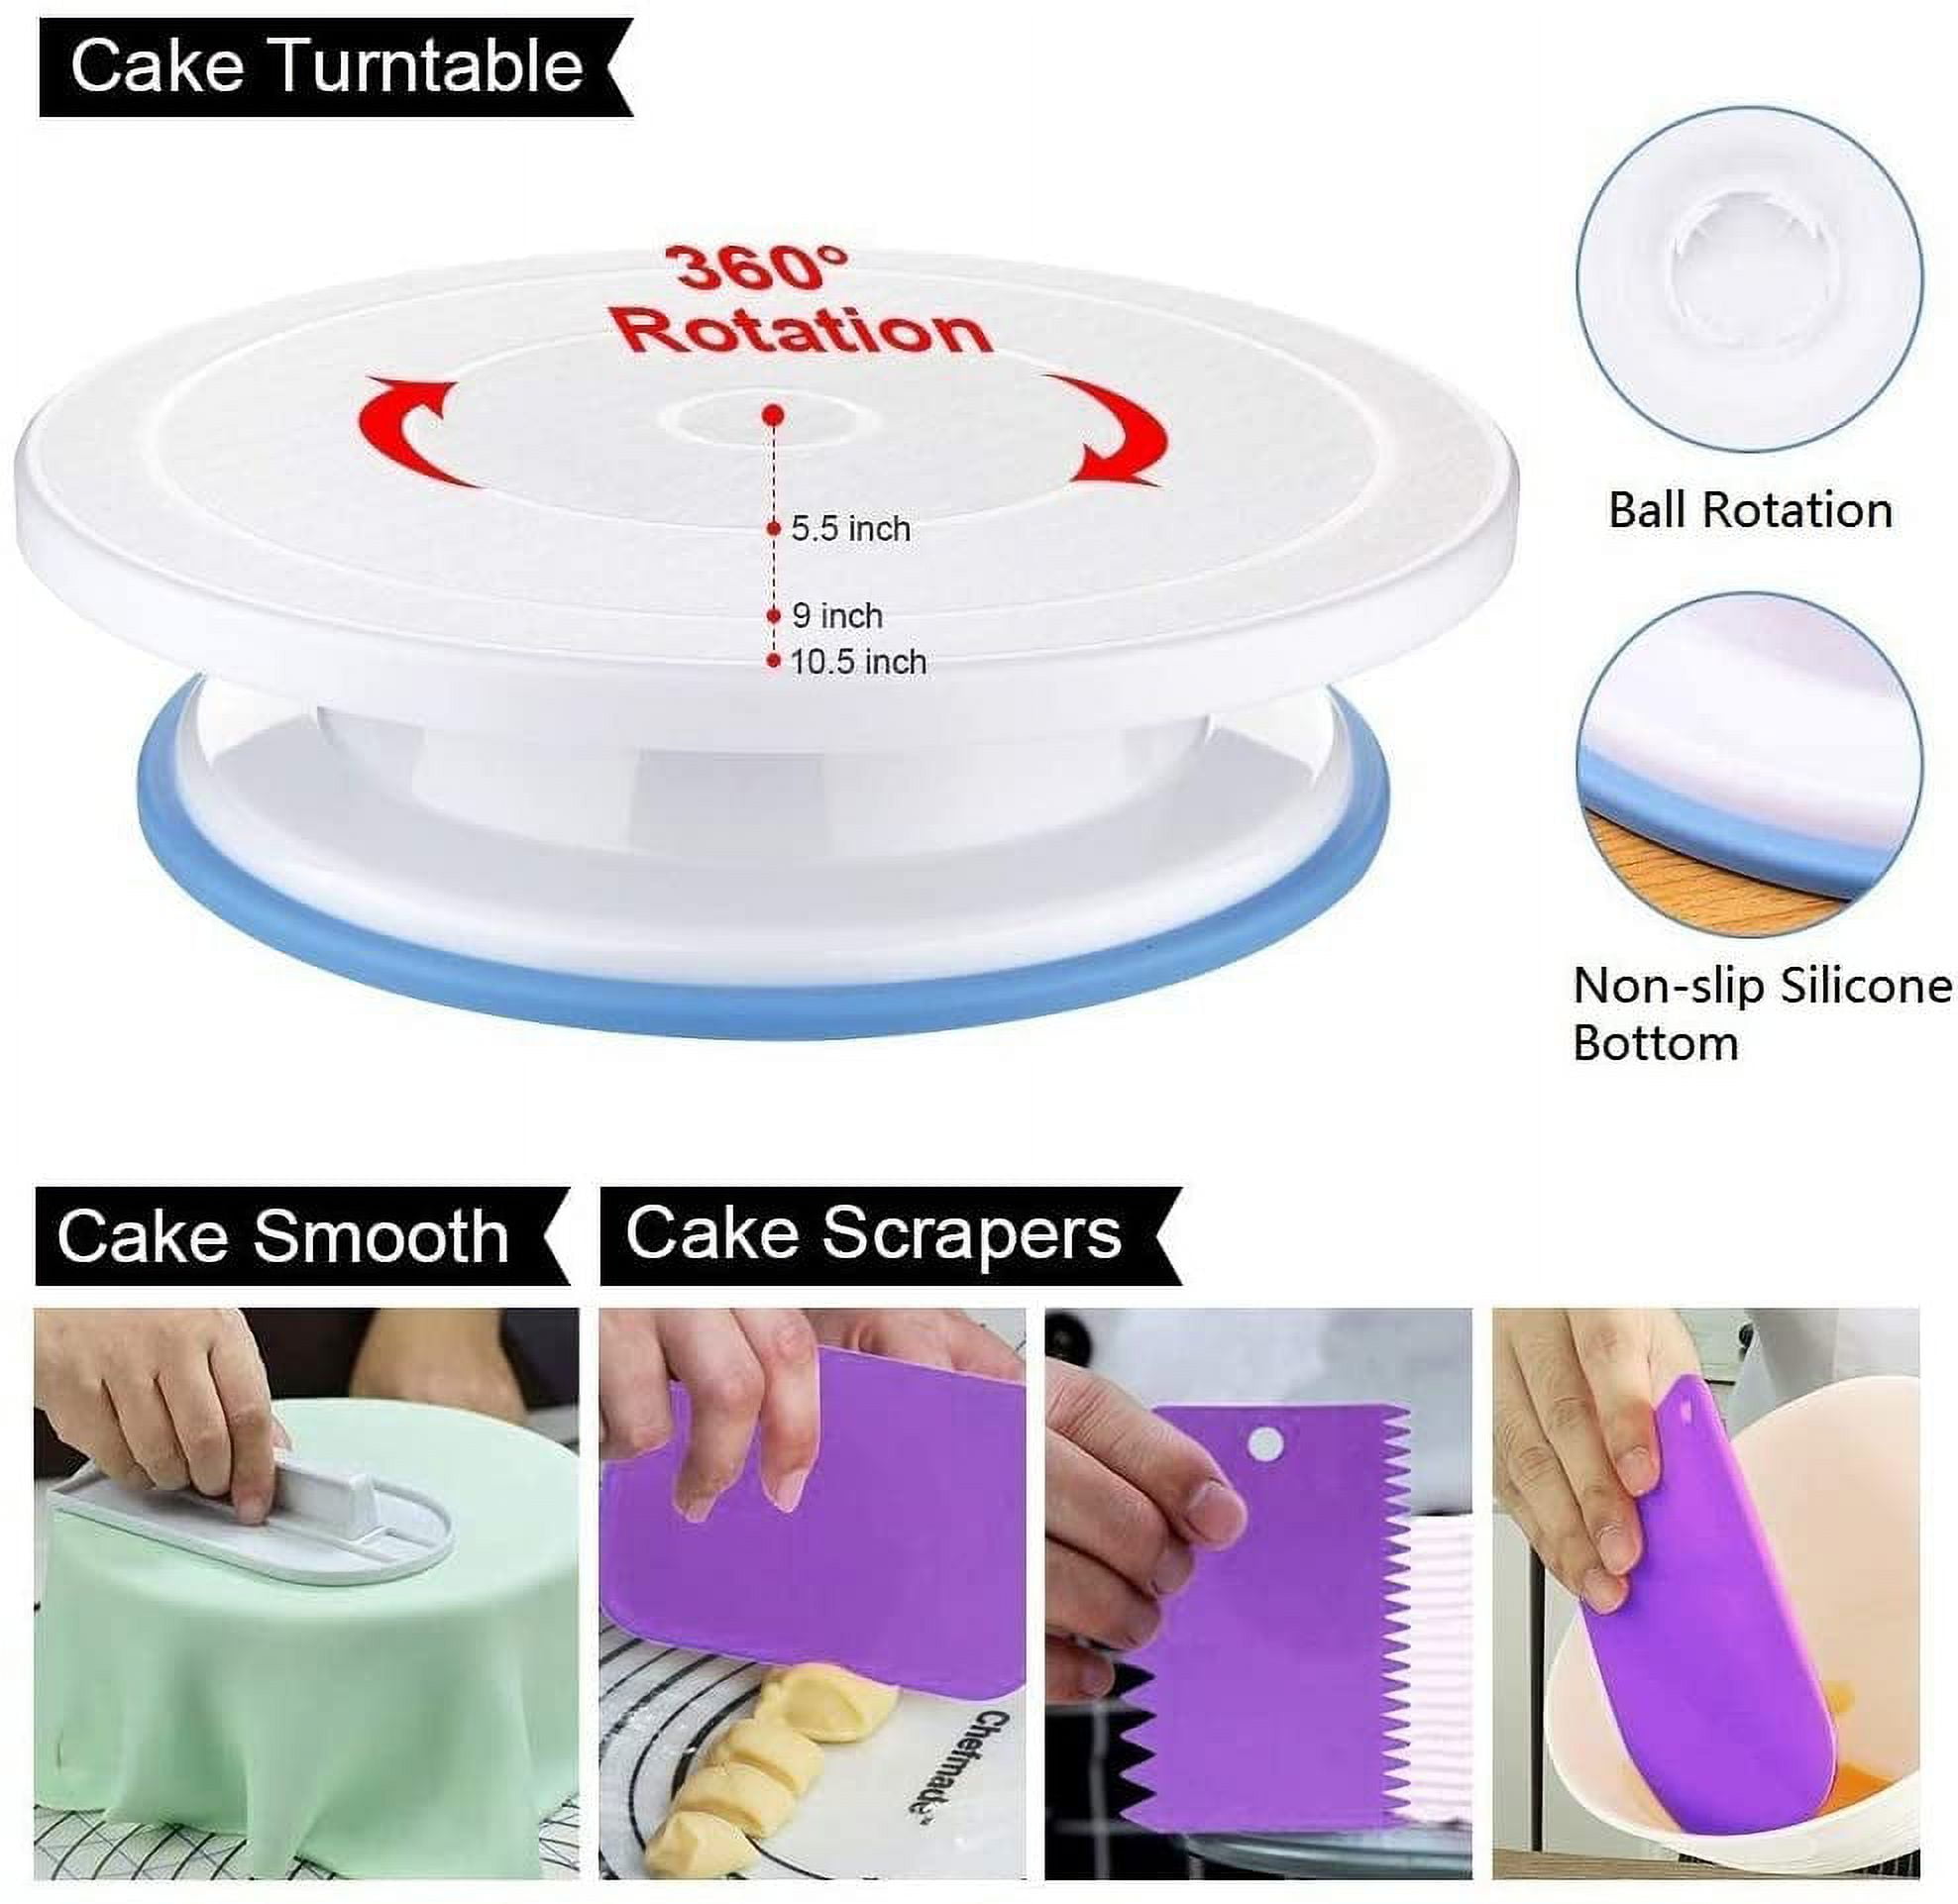 Cake Decorating Supplies, 507 PCS Cake Decorating Kit 3 Packs Spring form Cake  Pans, Cake Rotating Turntable, 48 Piping Icing Tips, 7 Russian Nozzles,  Chocolate Mold Baking, Mother's Day Gift Ideas